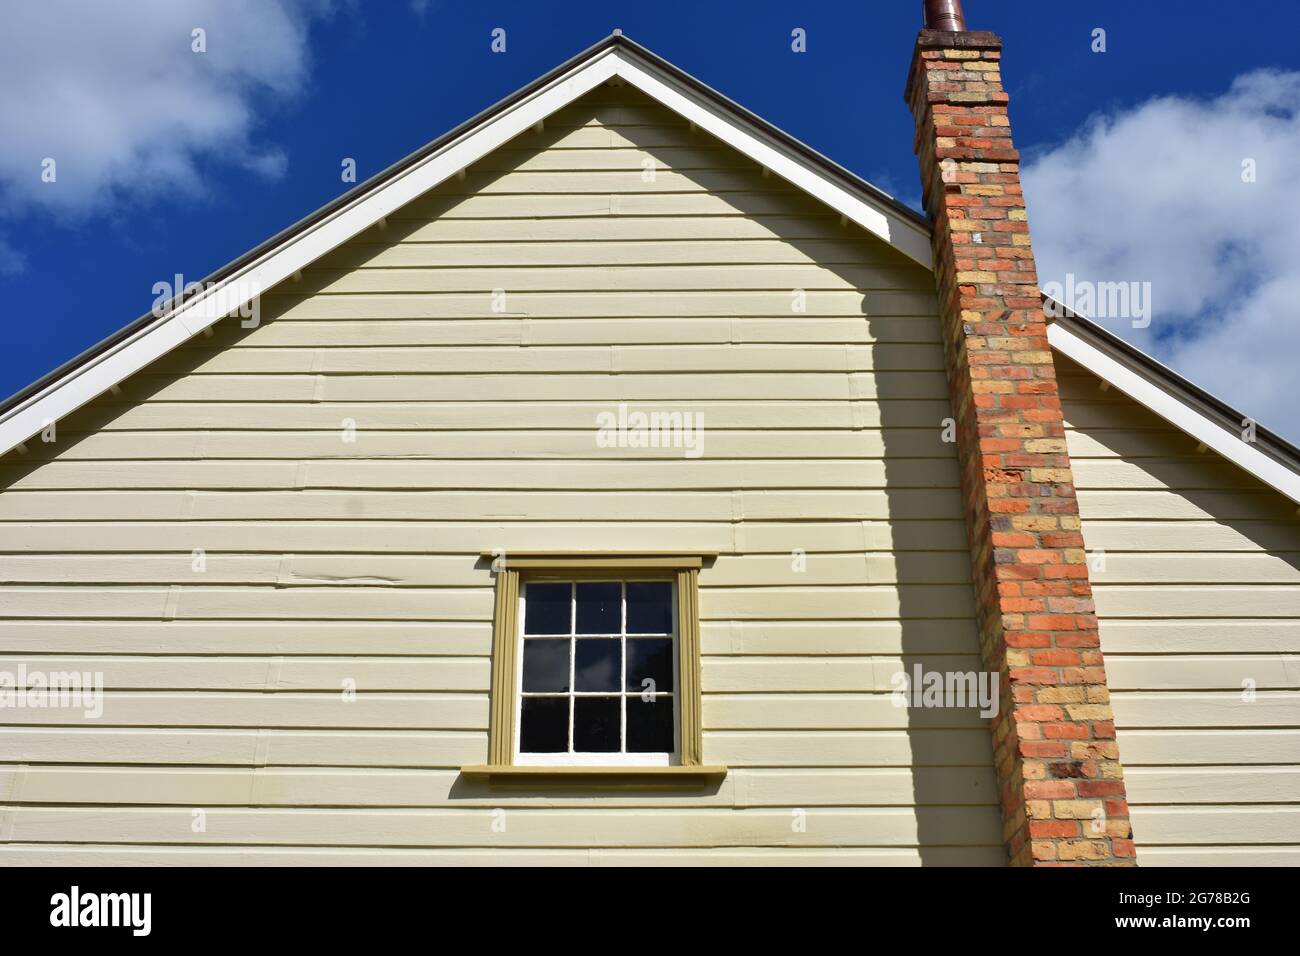 Wall detail of vintage wooden house with red brick chimney and gable roof. Stock Photo